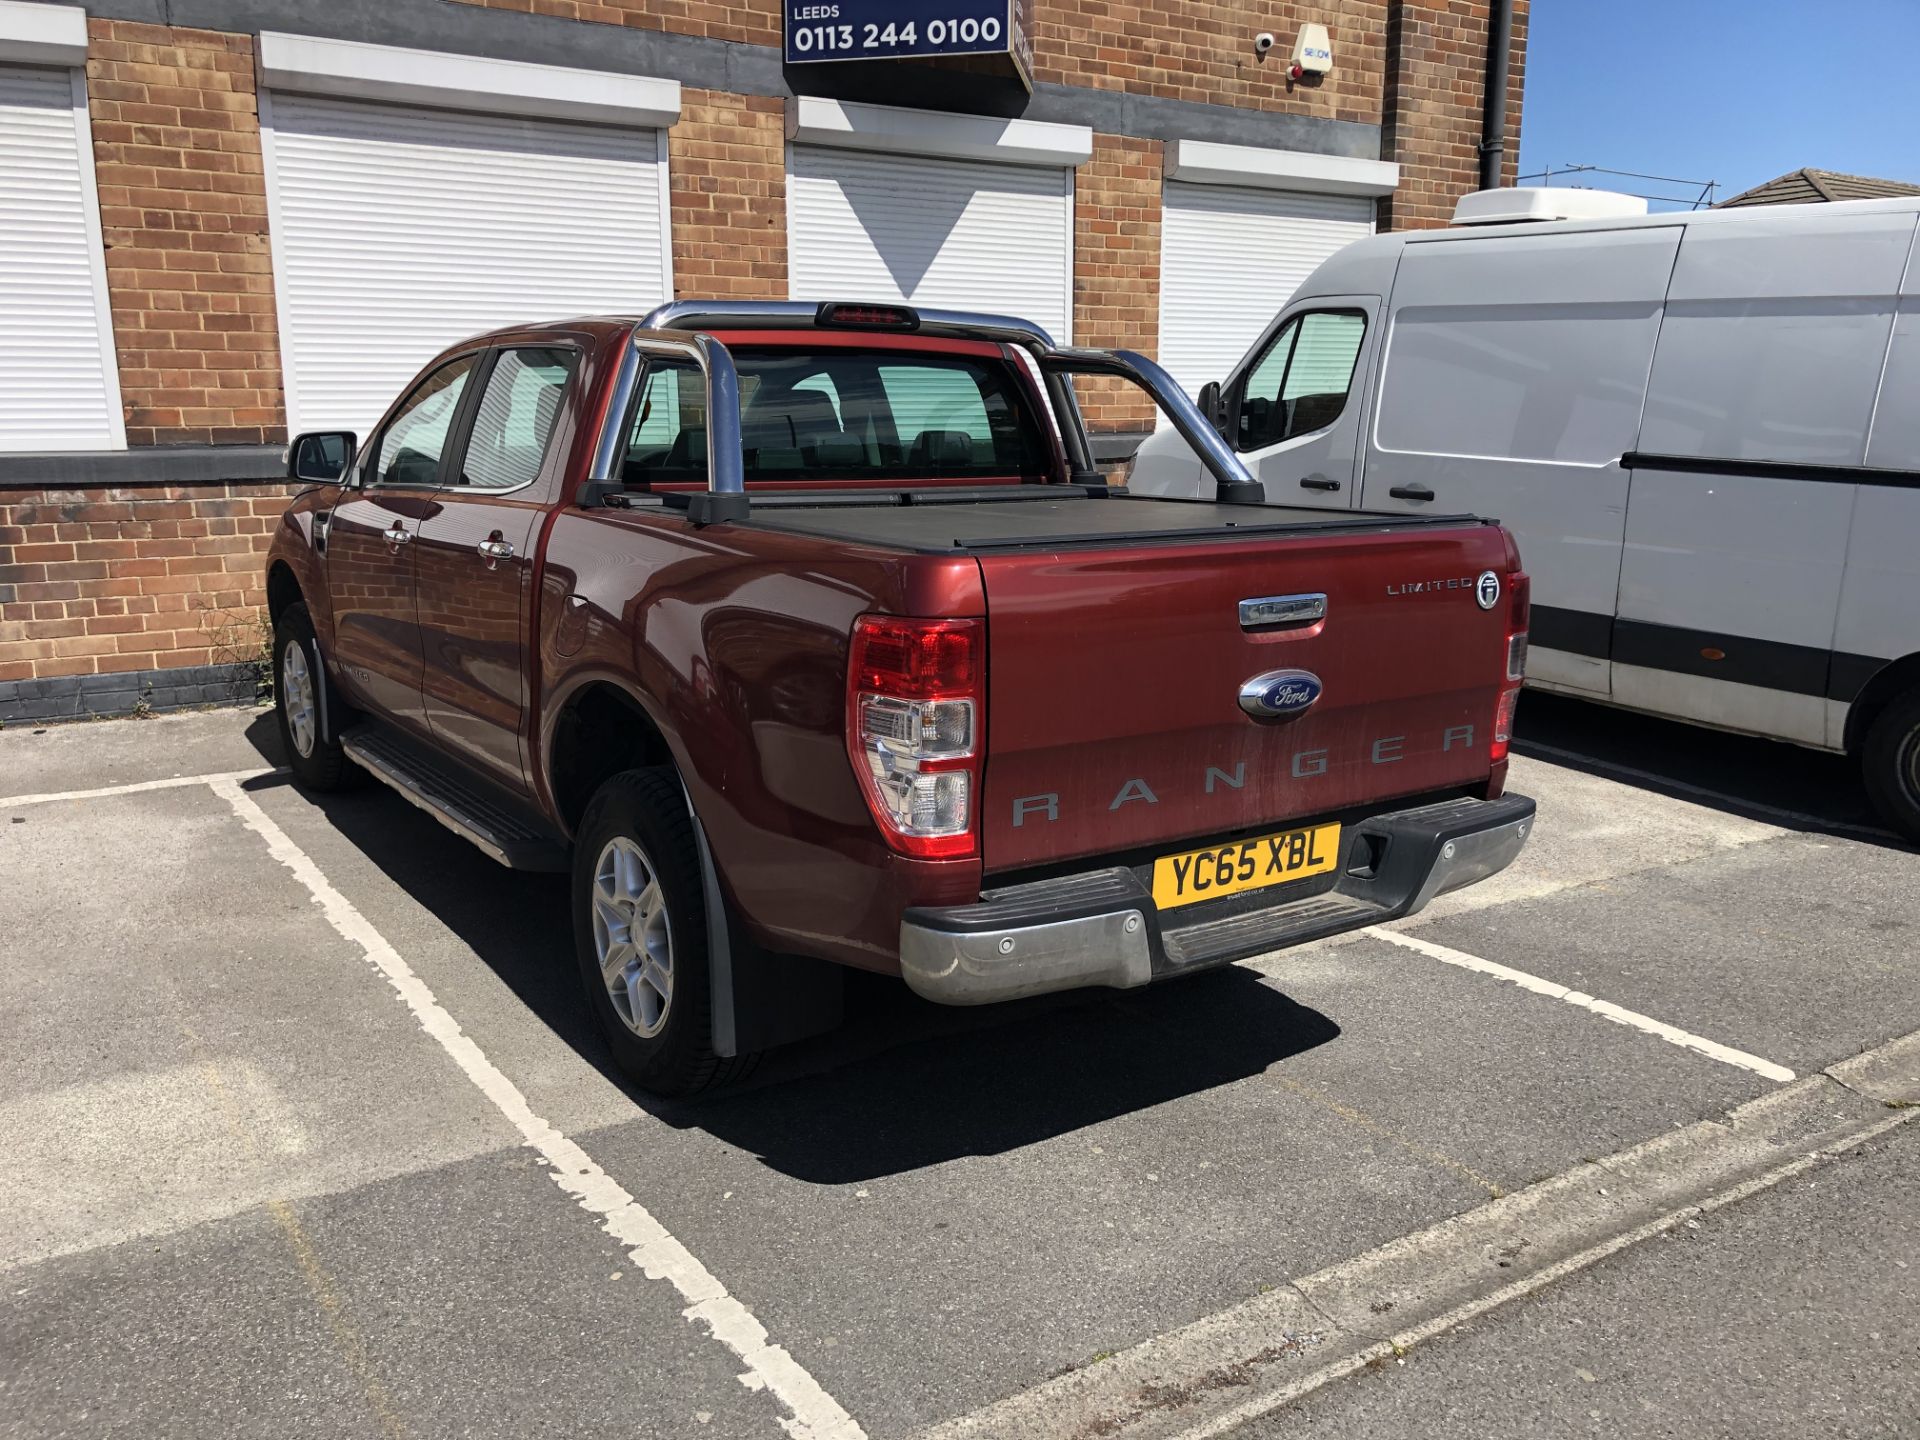 Ford Ranger Limited Double Cab 2.2TDc 150(AUTO) PICKUP, Reg No: YC65 XBL, Date of Registration: 30/